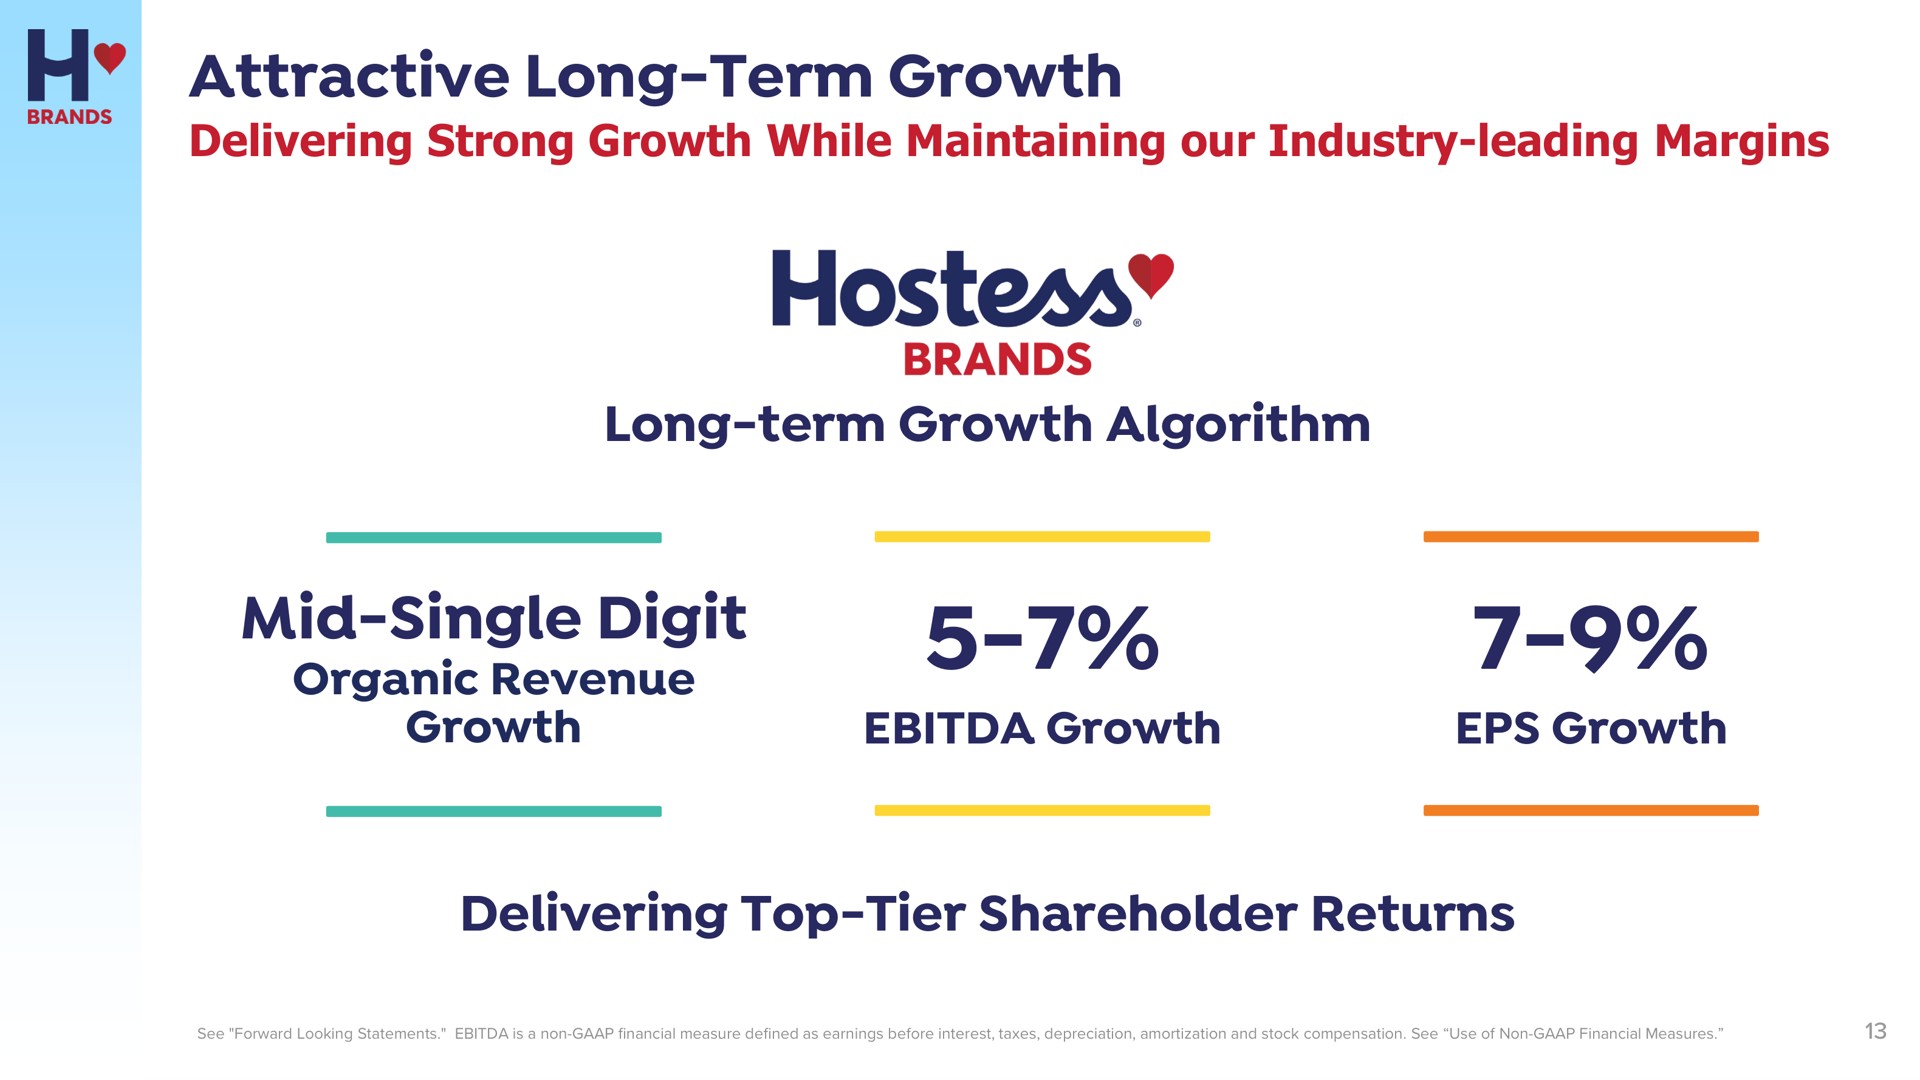 attractive long term growth long term growth algorithm mid single digit organic revenue growth growth growth delivering top tier shareholder returns strong while maintaining our industry leading margins hostess | Hostess